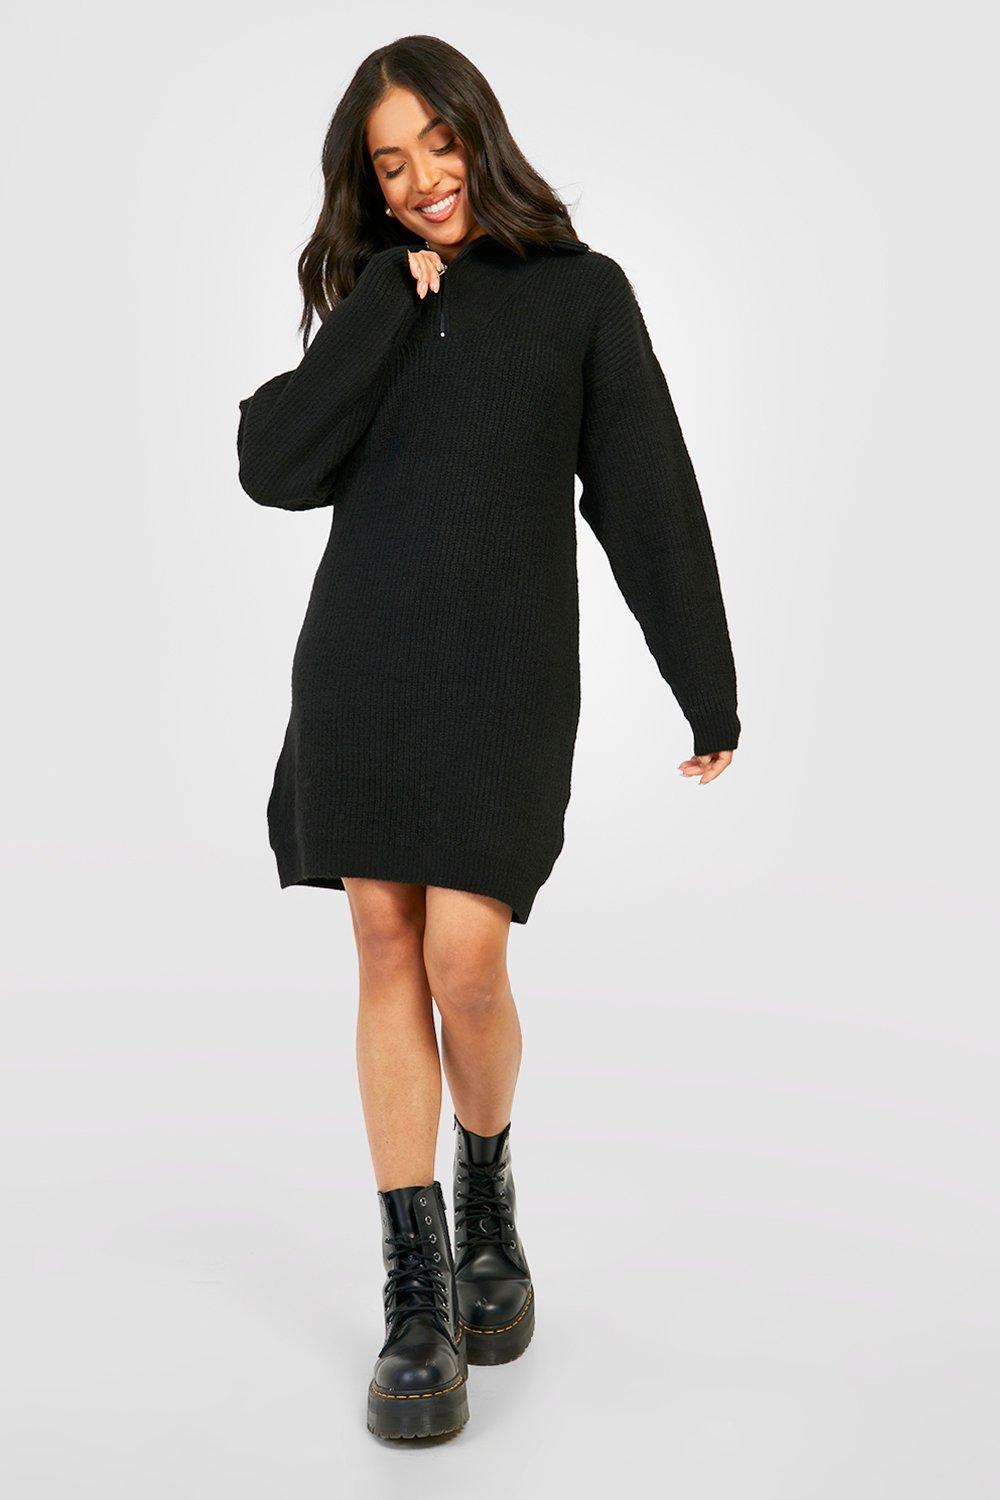 Boohoo Synthetic Petite Soft Knit Zip Polo Jumper Dress in Black Womens Clothing Suits Skirt suits 